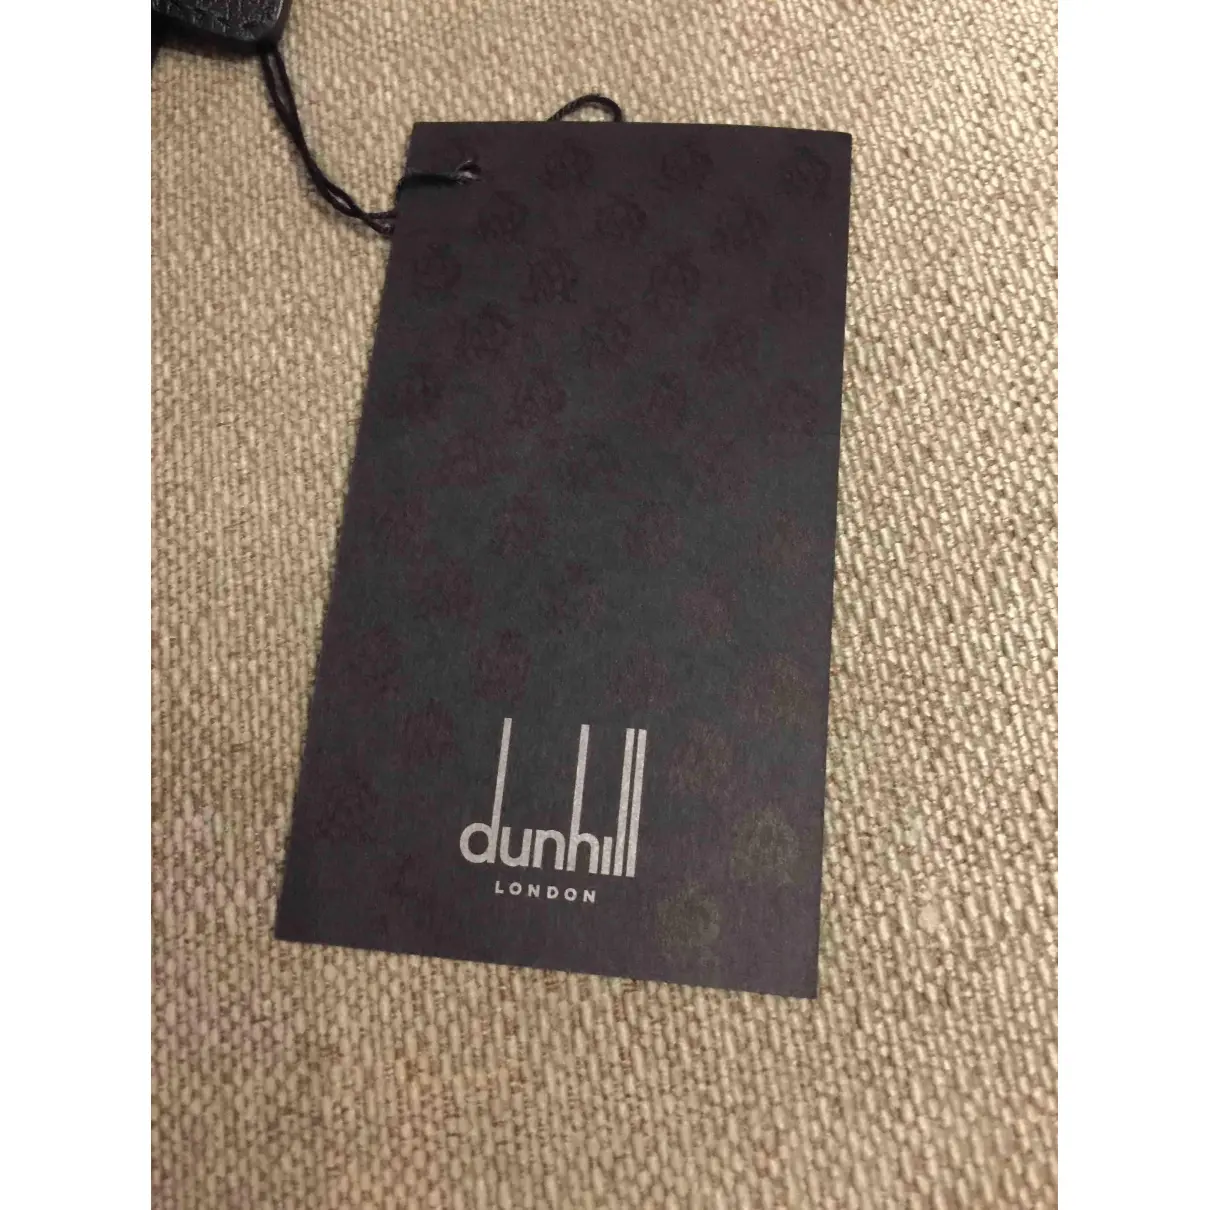 Buy Alfred Dunhill Leather bag online